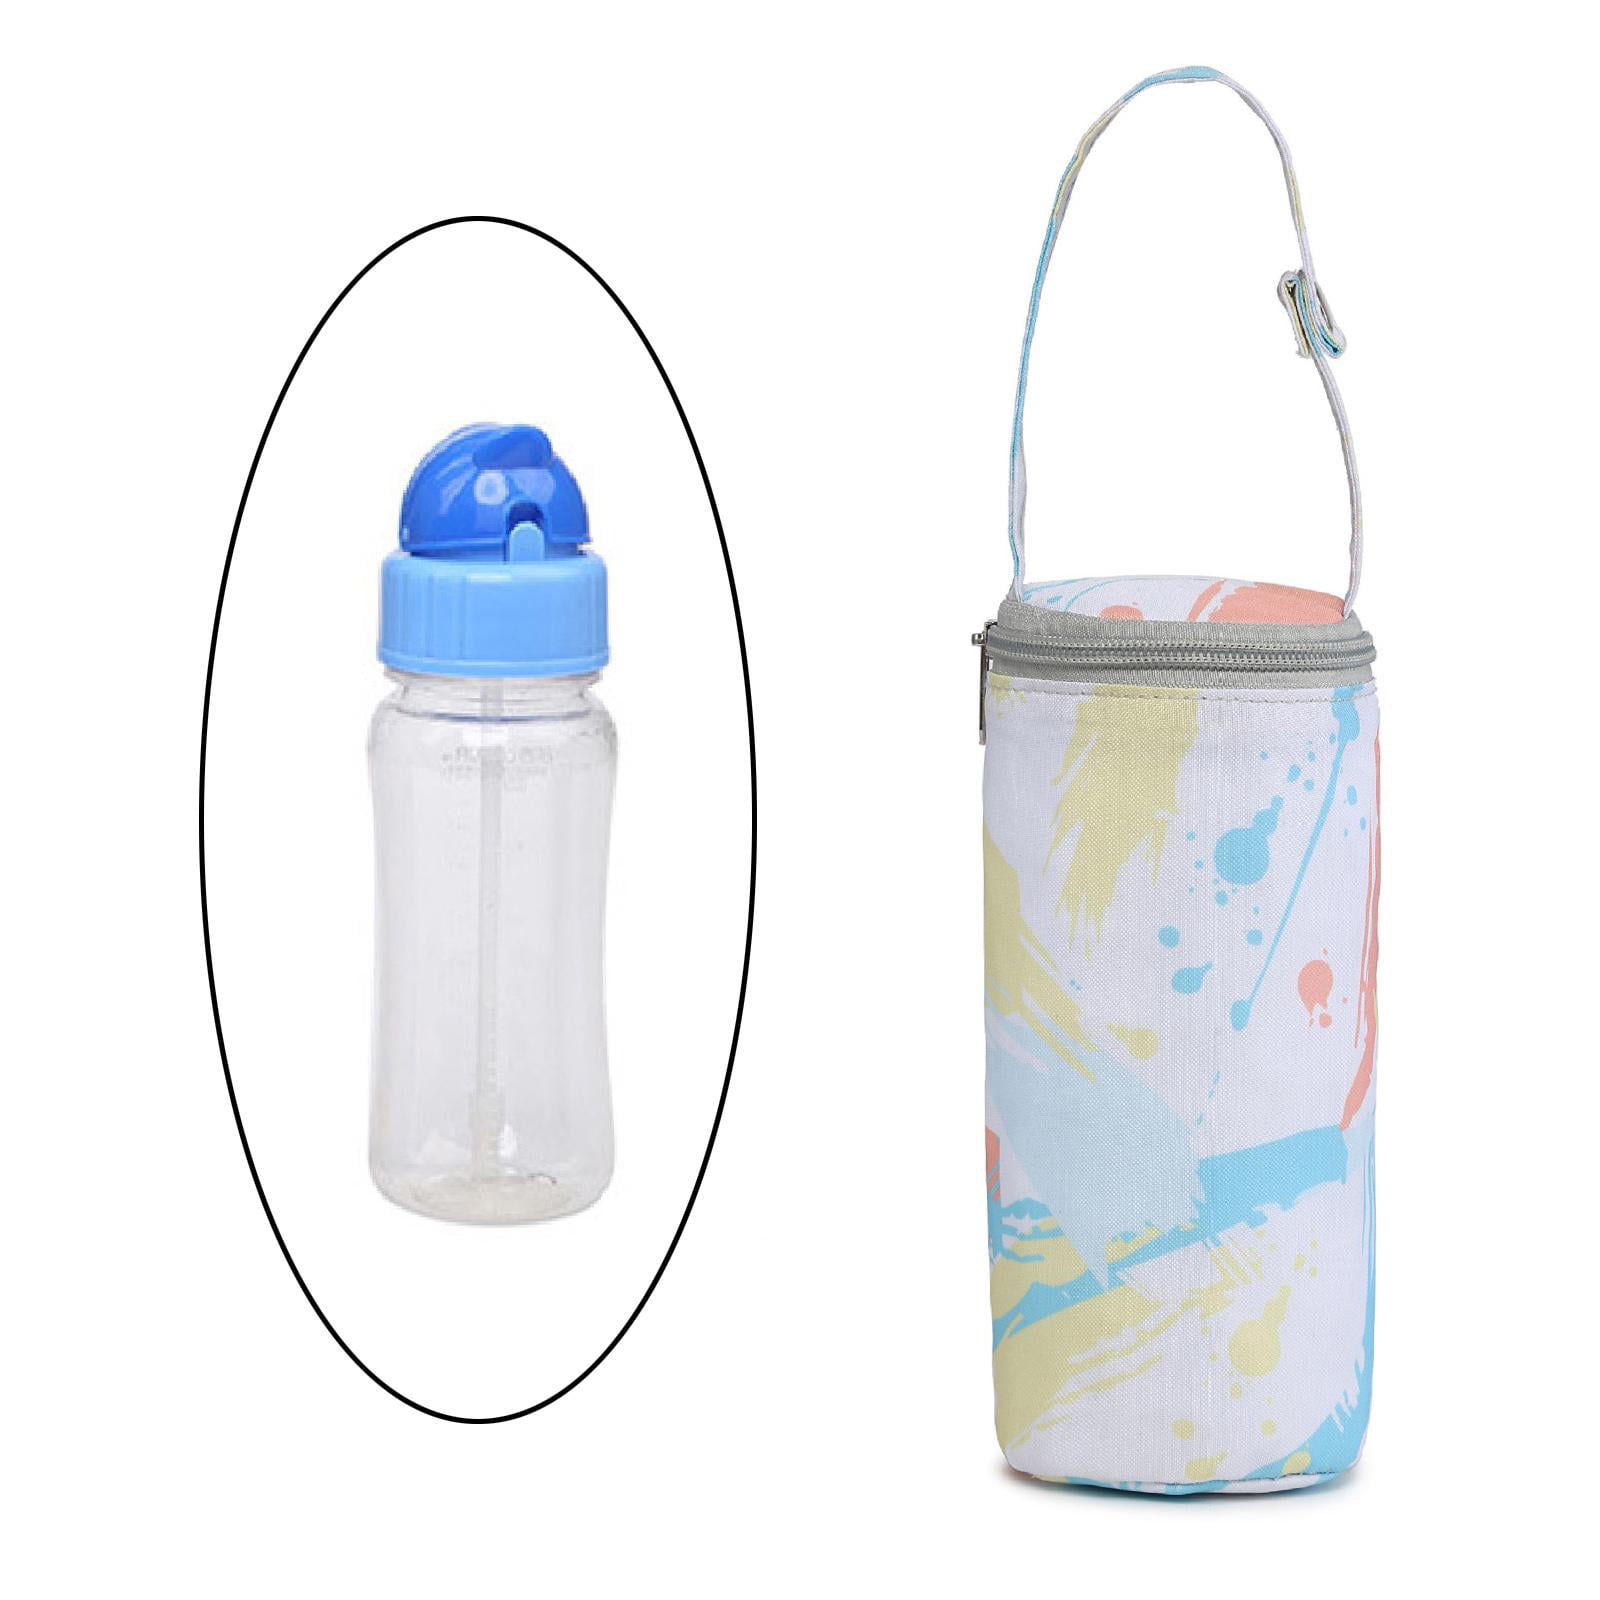 Portable Insulated Baby Bottle Bags Breastmilk Storage Travel Carrier Holder 